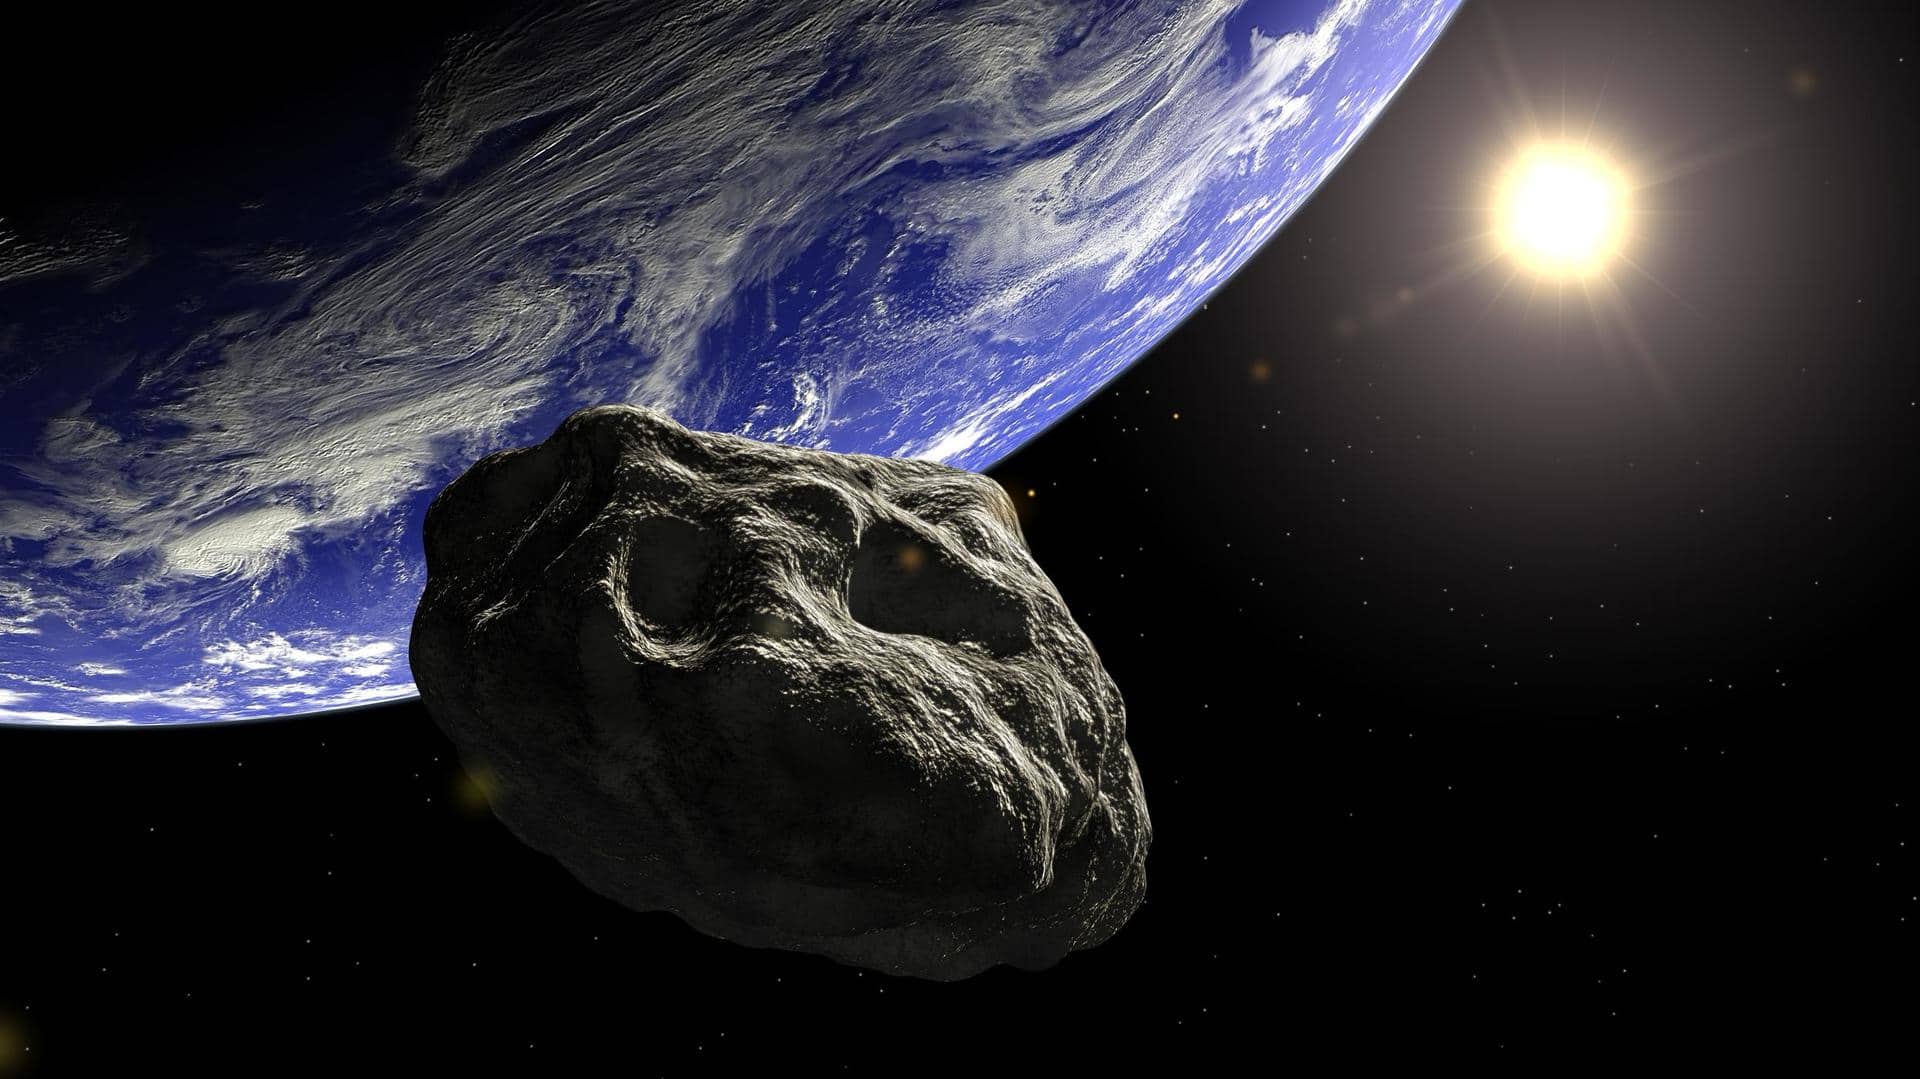 Alert! A 75ft asteroid is heading Earth's way, says NASA